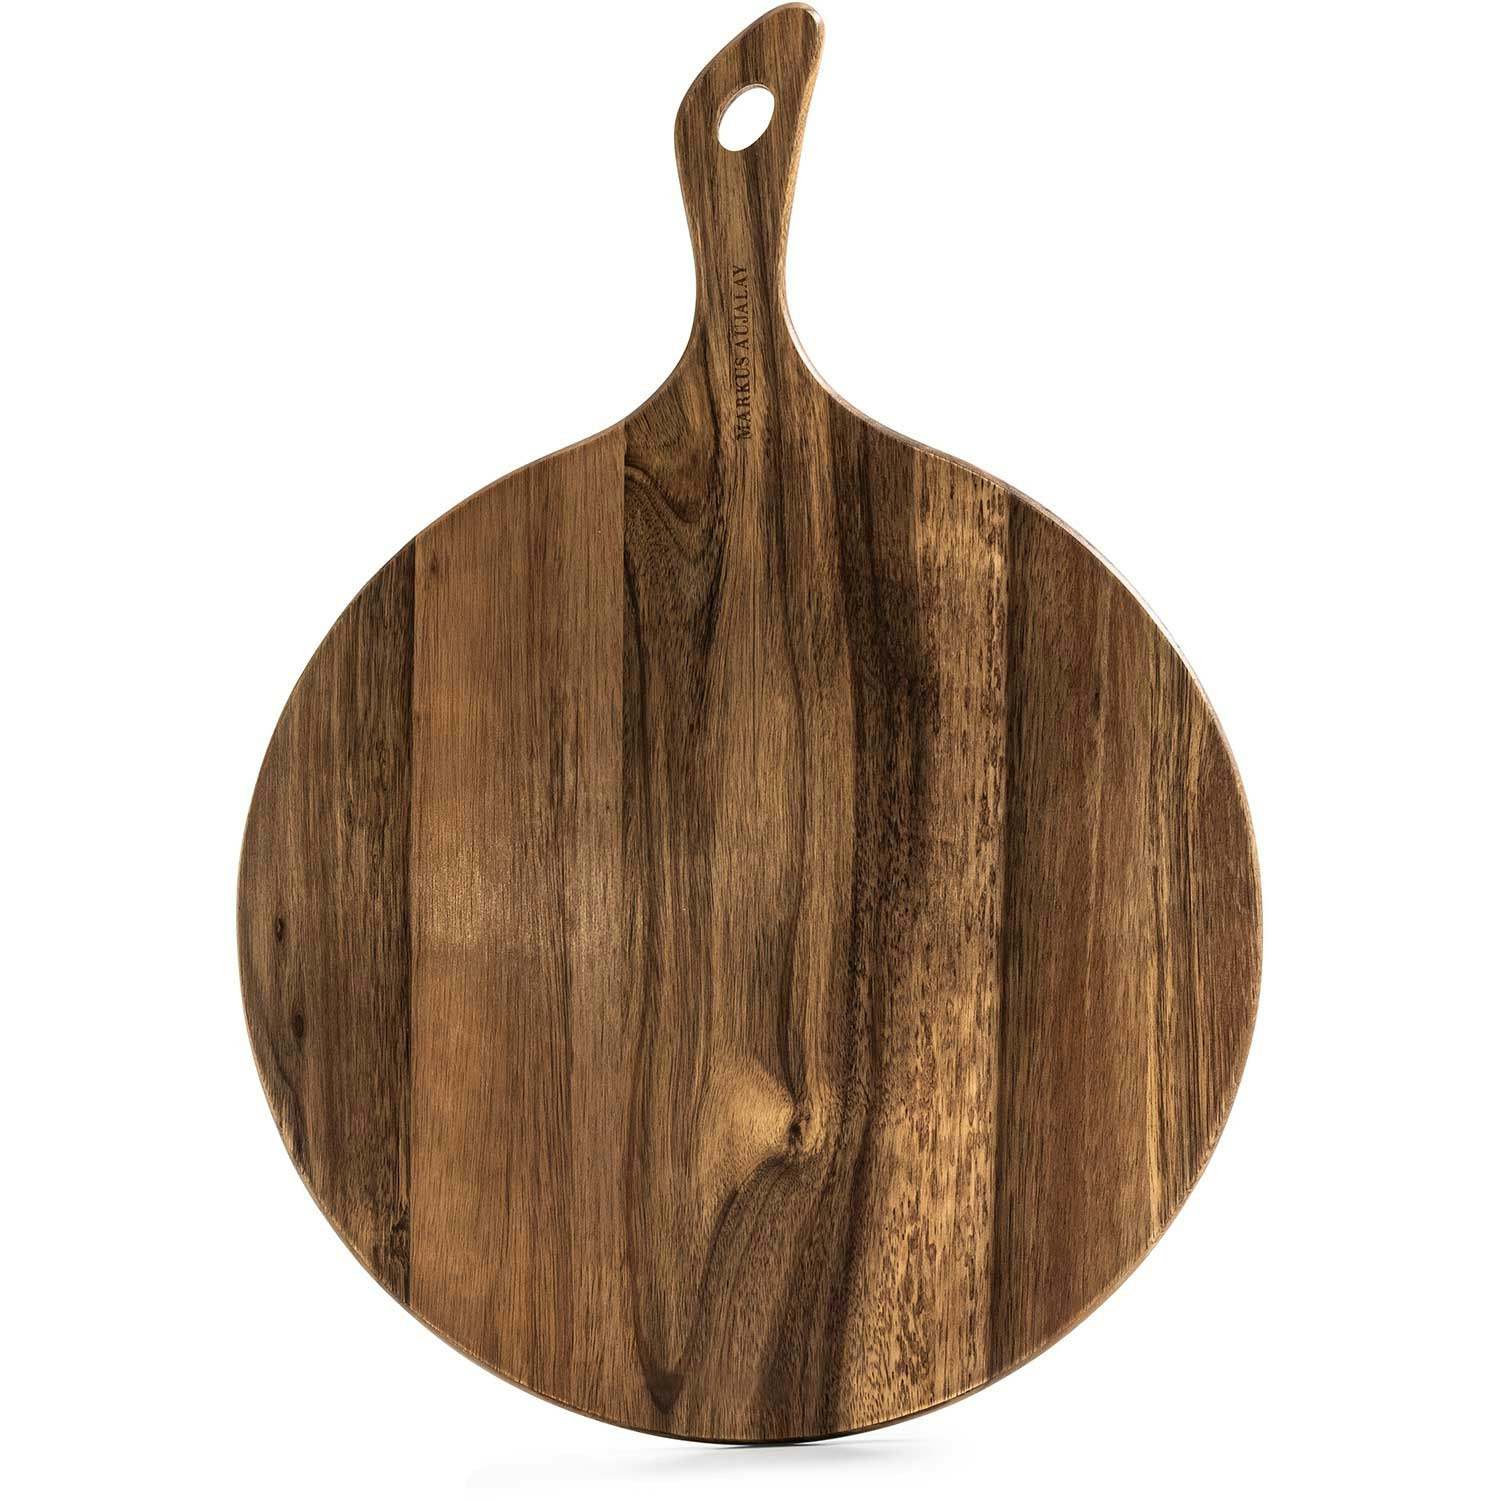 Round circular wooden chopping board cutting pizza wood double-sided 35 cm  /T2